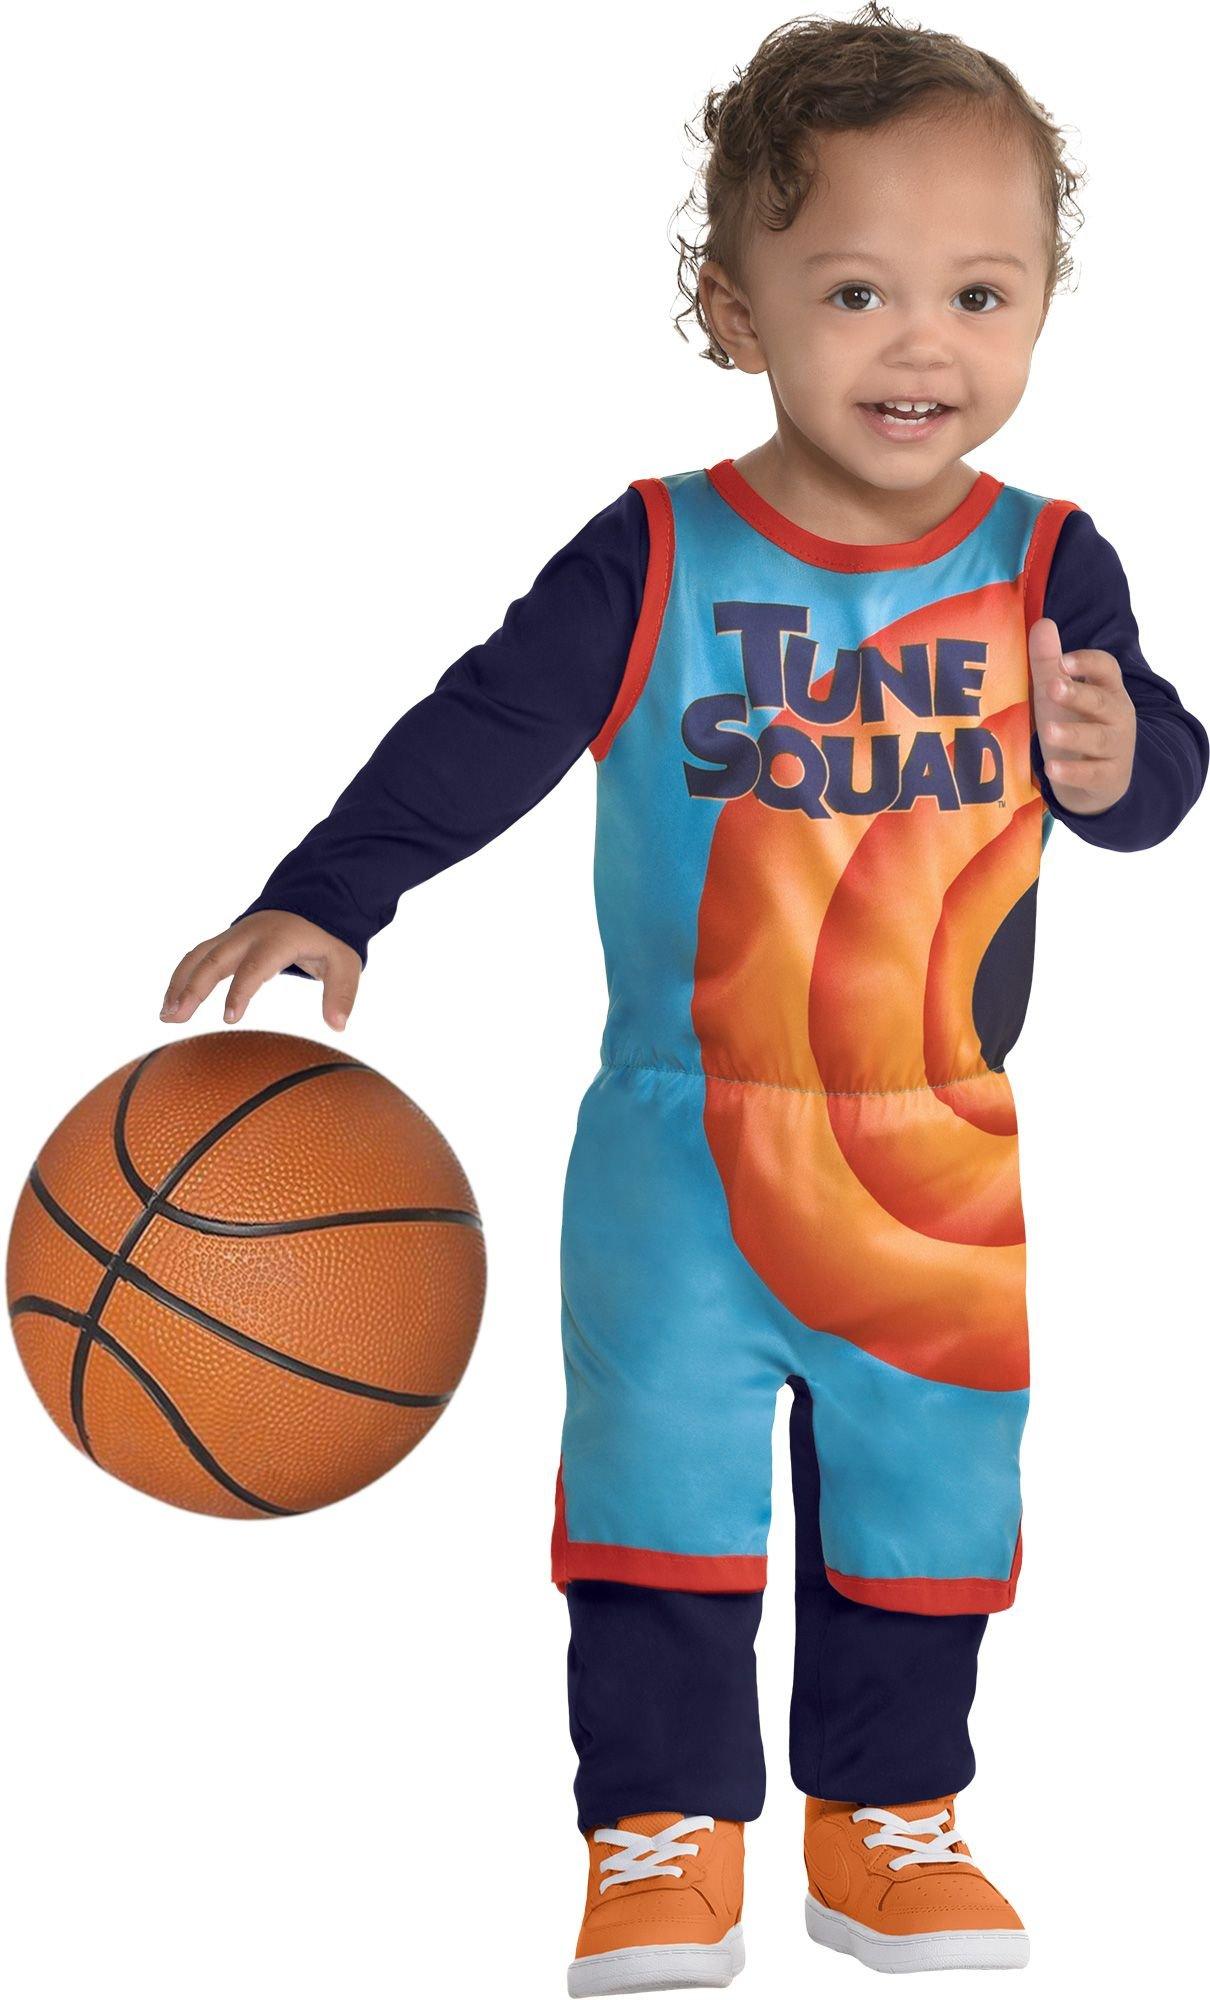 Youth Size Space Jam Basketball Jersey - Get Your Kids Ready for